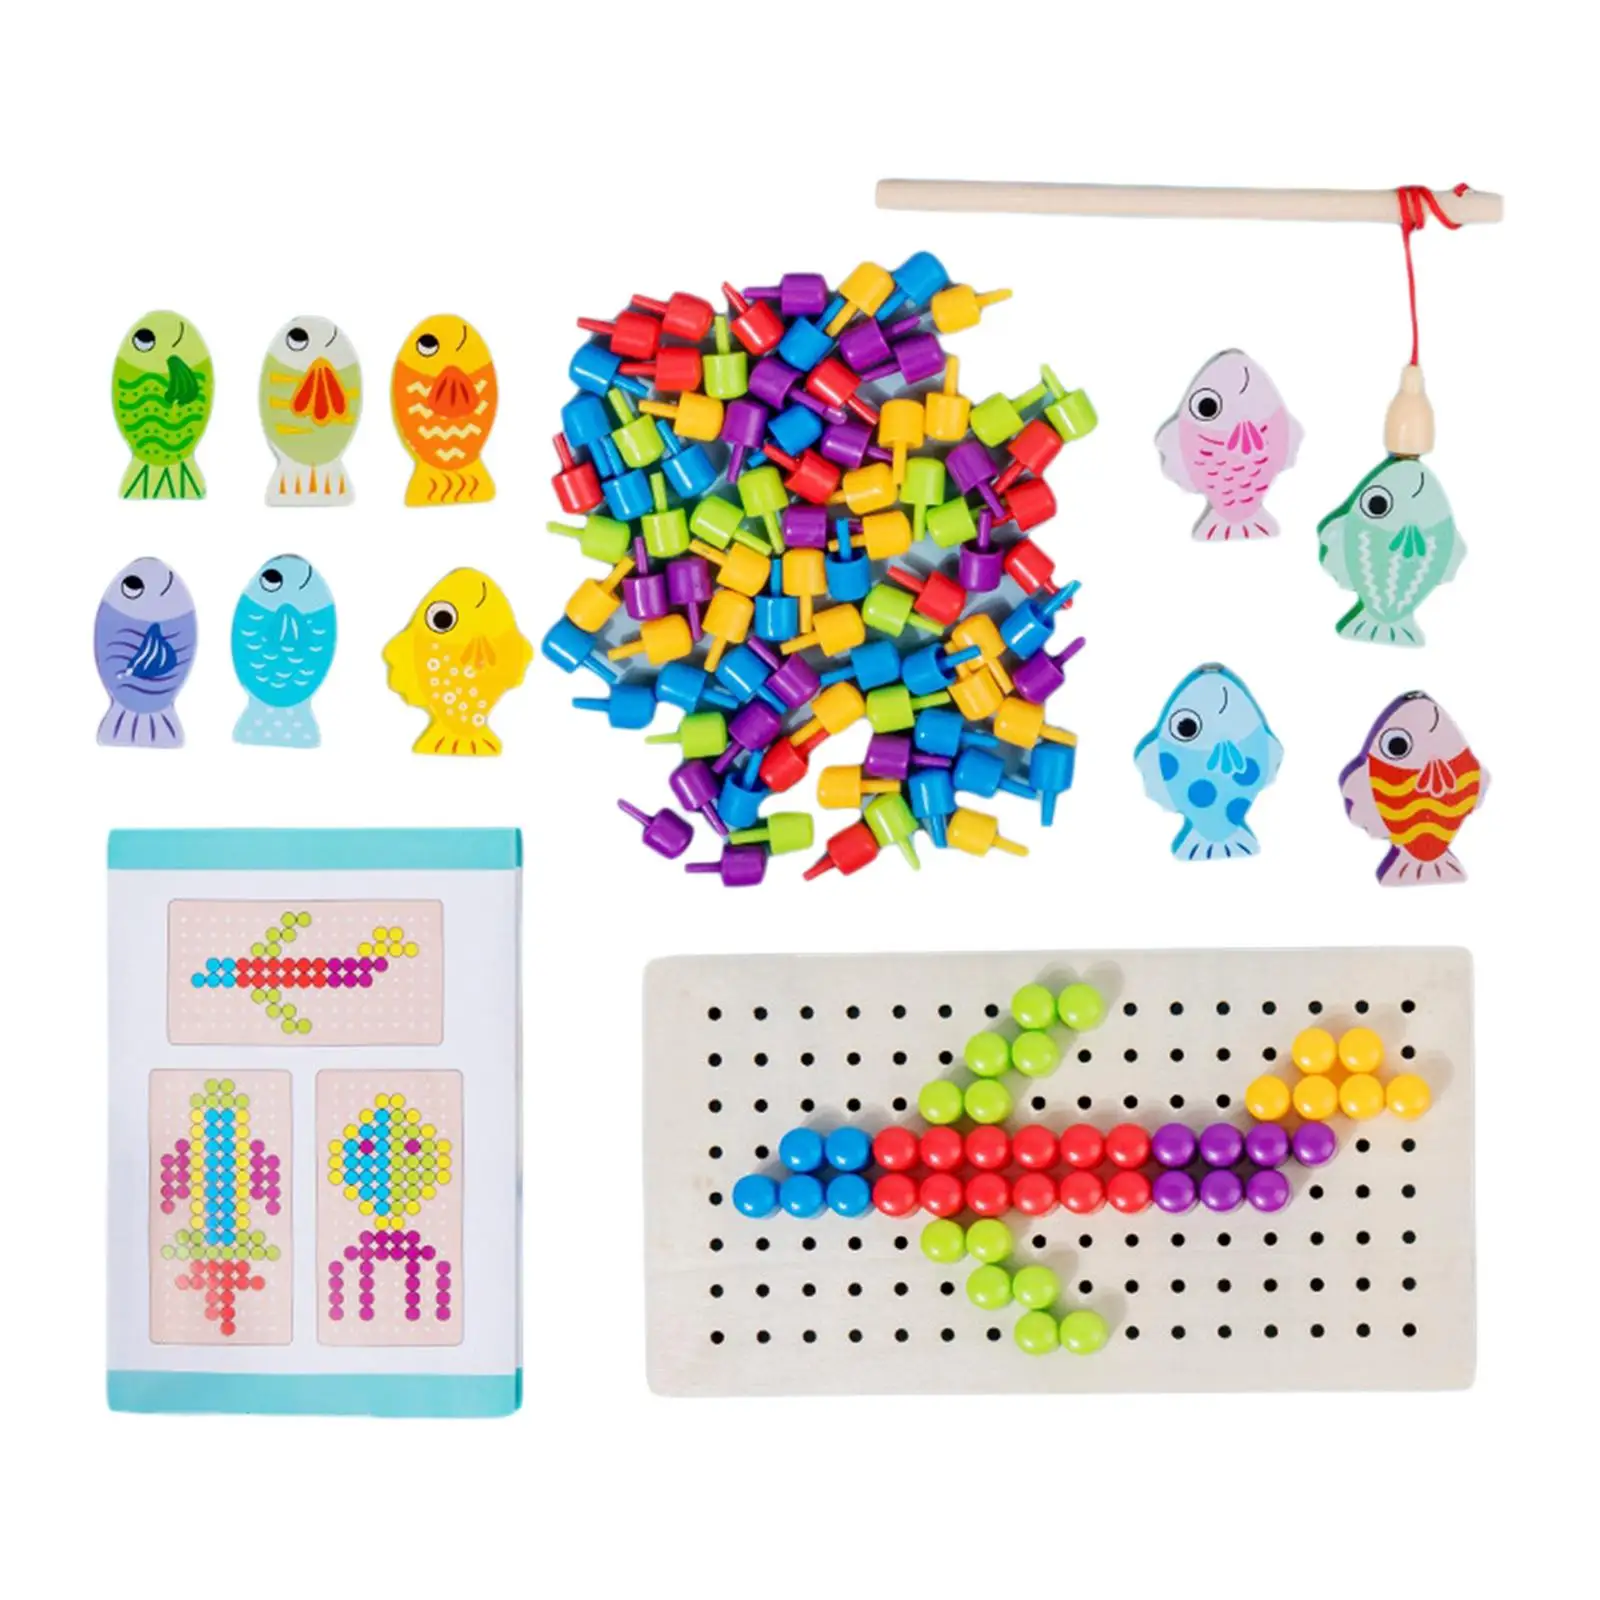 Kids Fishing Toys Party Game Toy Party Favors Developmental Toy Teaching Aids Fishing Board Game for Boys Girls Holiday Gifts